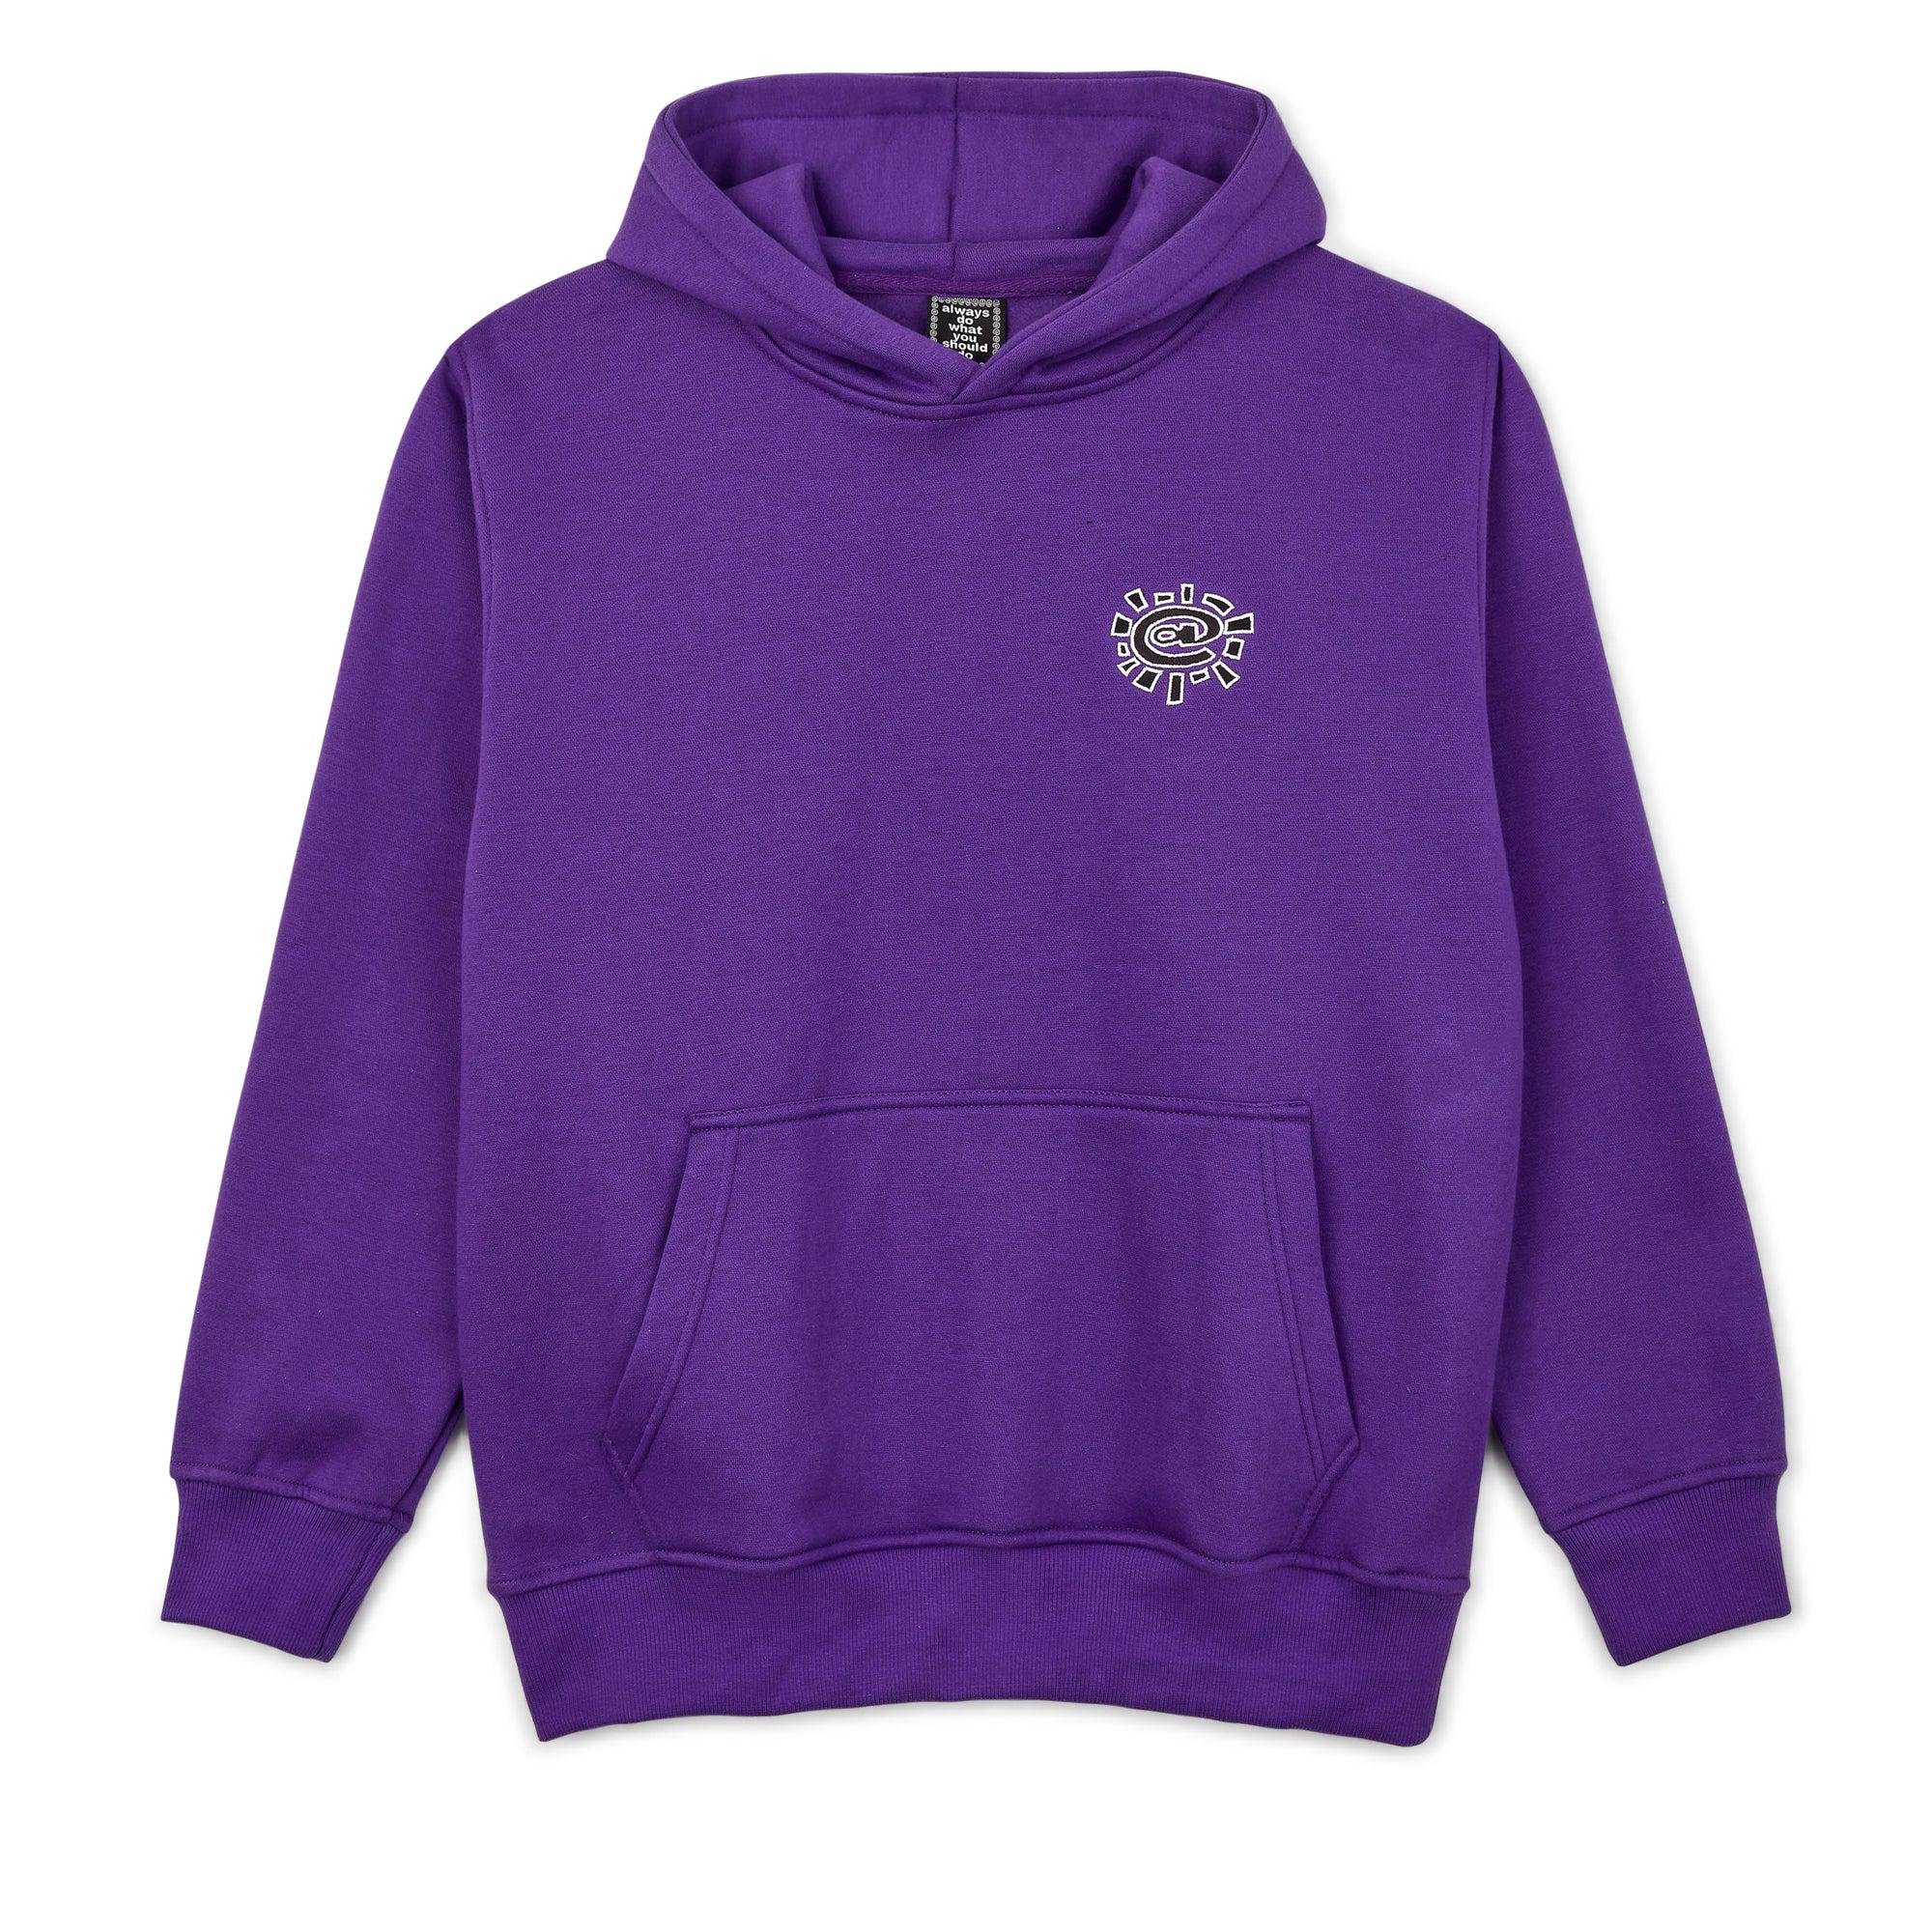 Always Do What You Should Do - Embroided @Sun Hoodie - (Purple) by ALWAYS DO WHAT YOU SHOULD DO